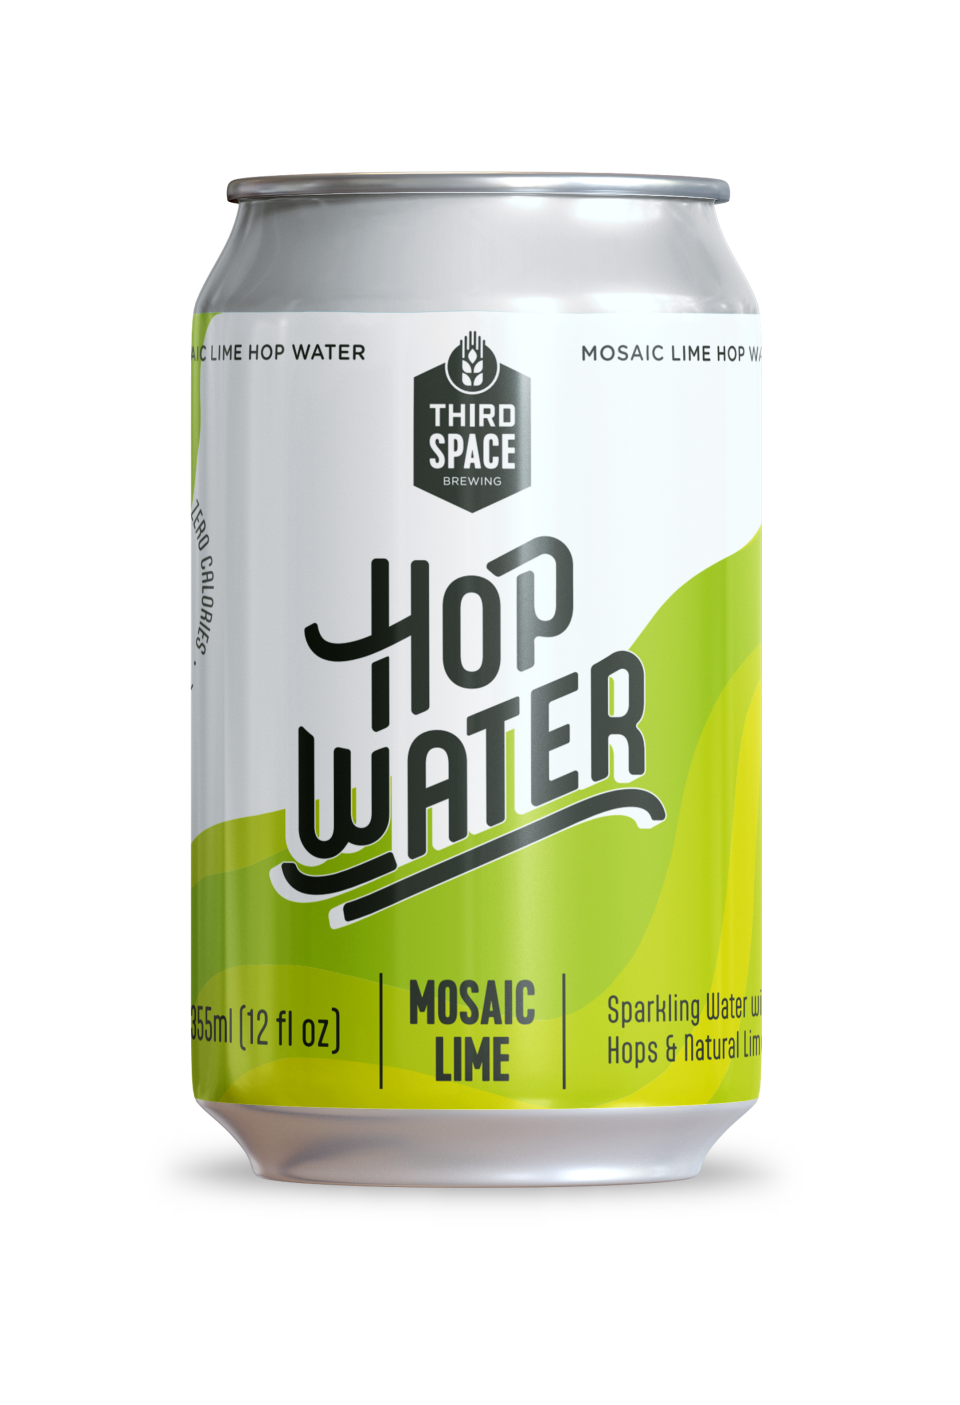 Hop Water is a nonalcoholic offering from Third Space Brewing.